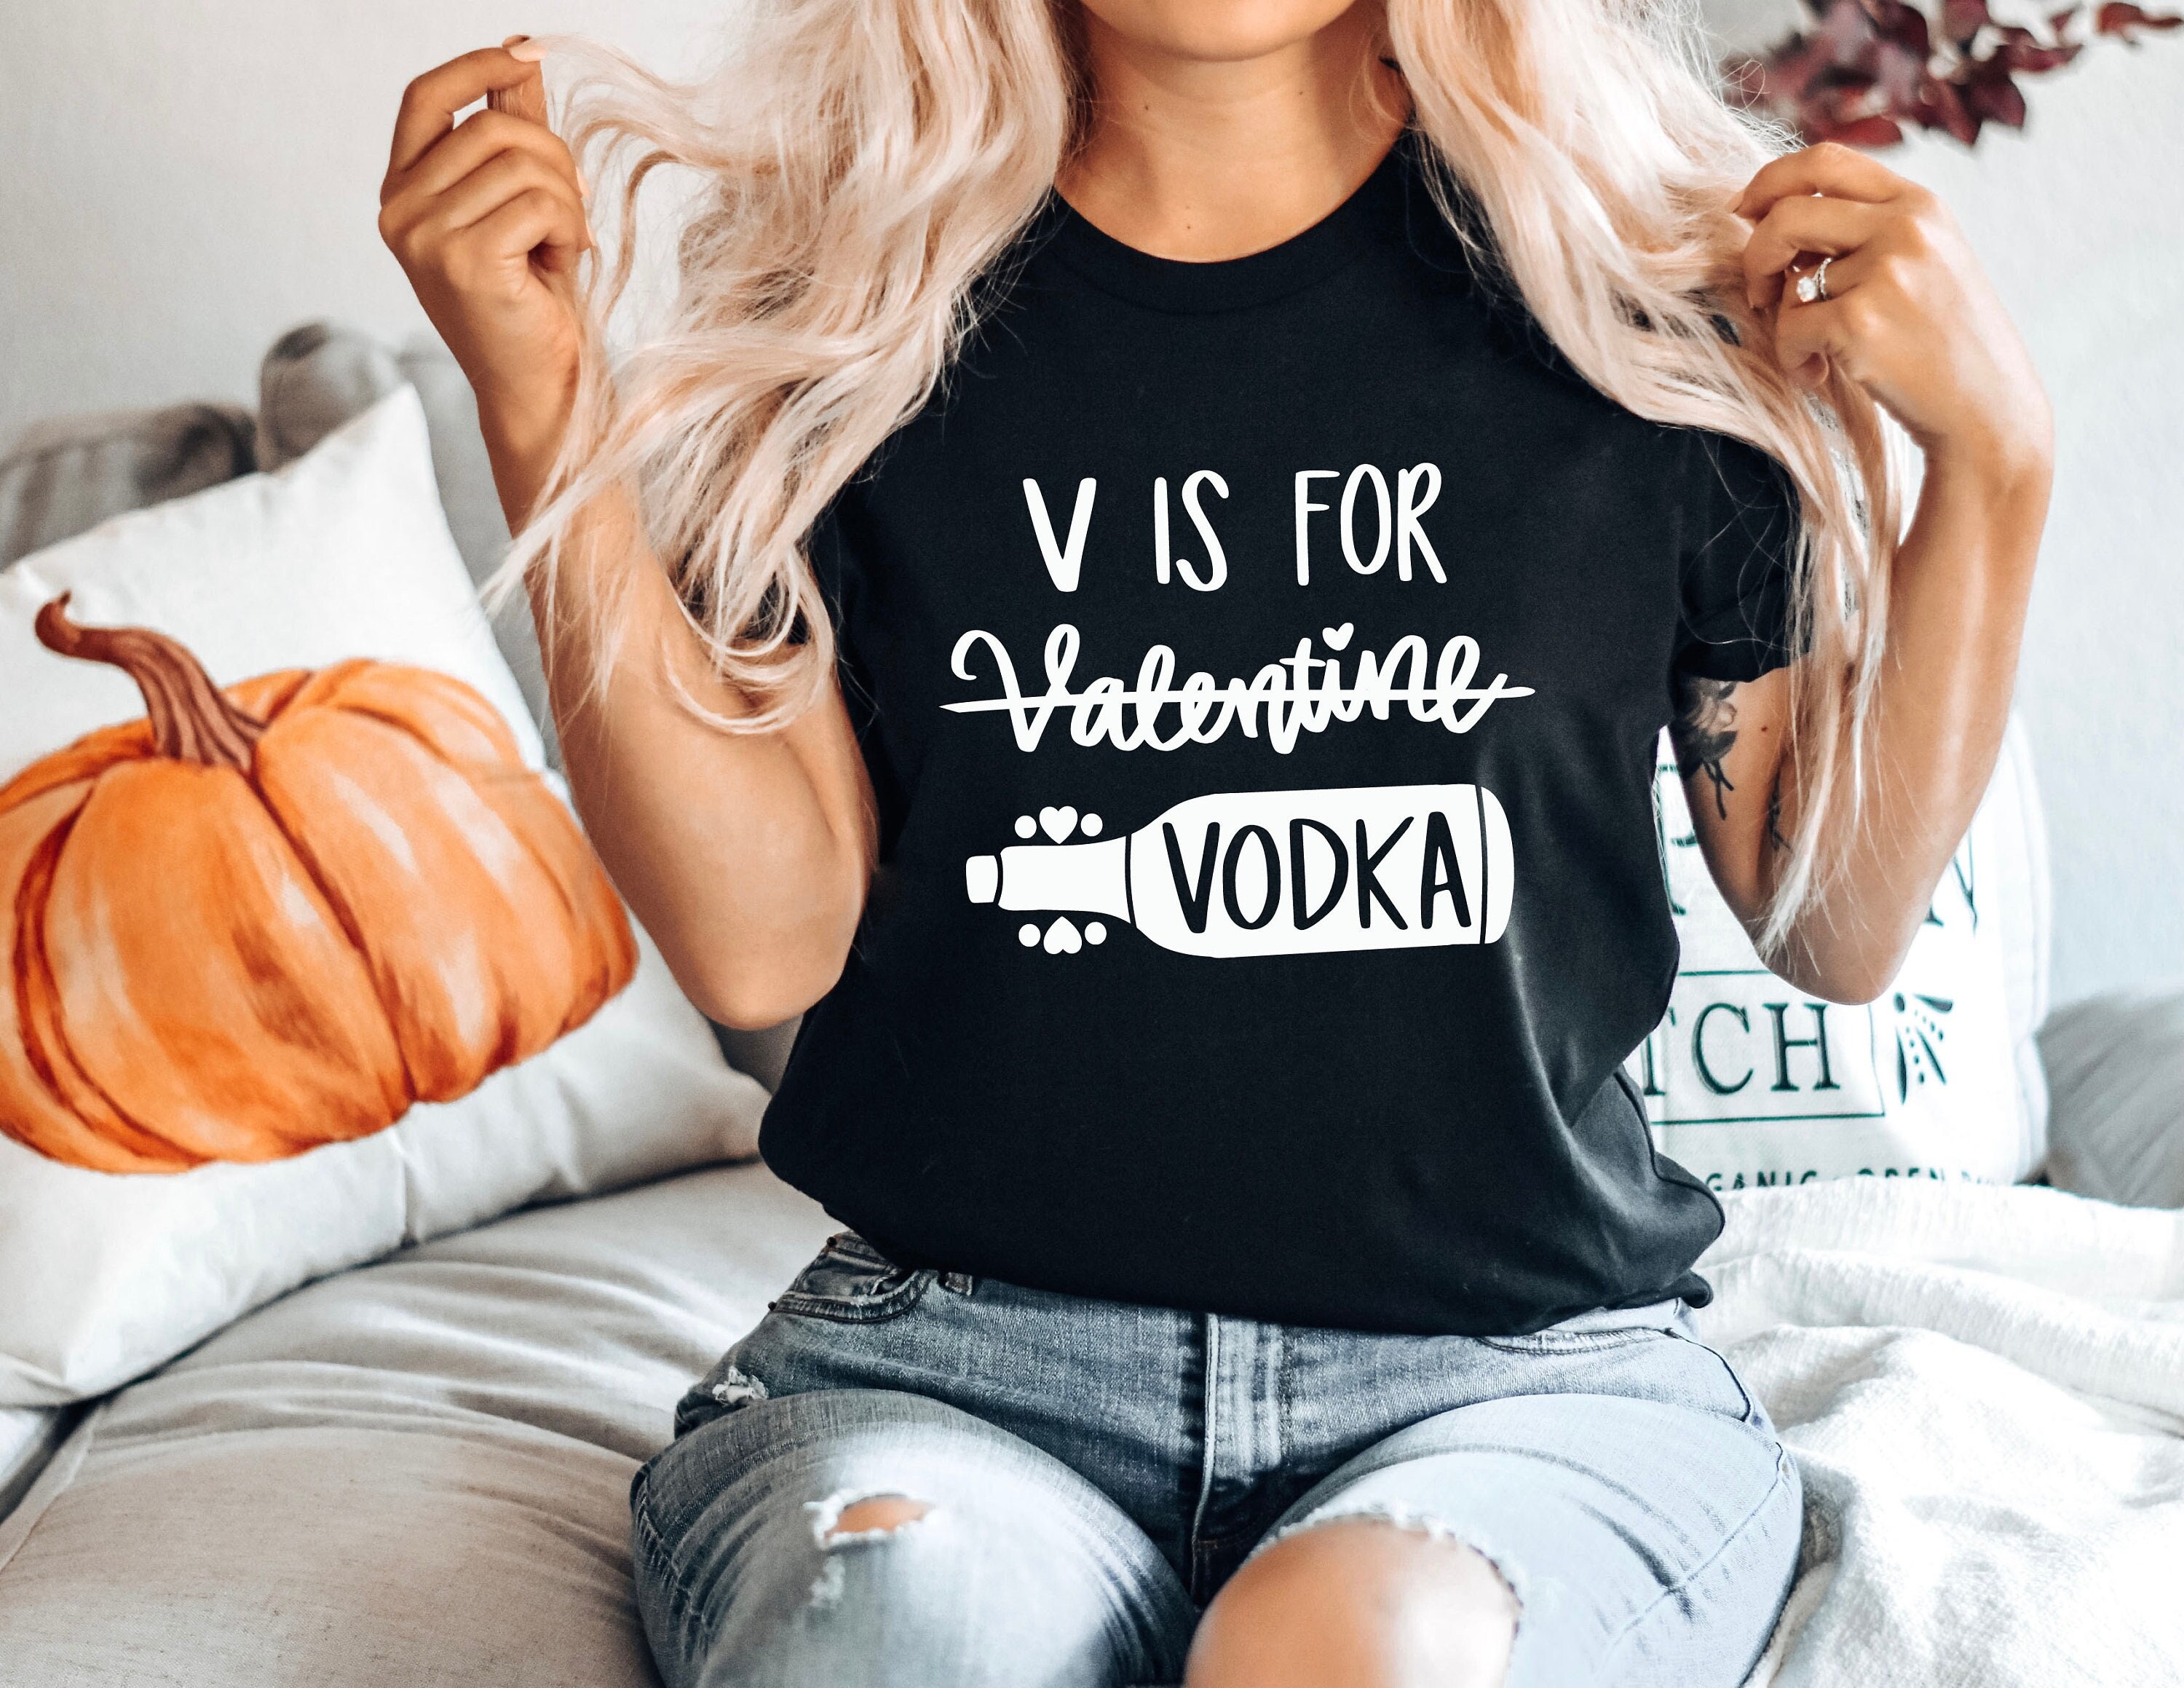 I Love You More Than Vodka Just Kidding Wodka Drink Lover Women's Plus Size  T-Shirt